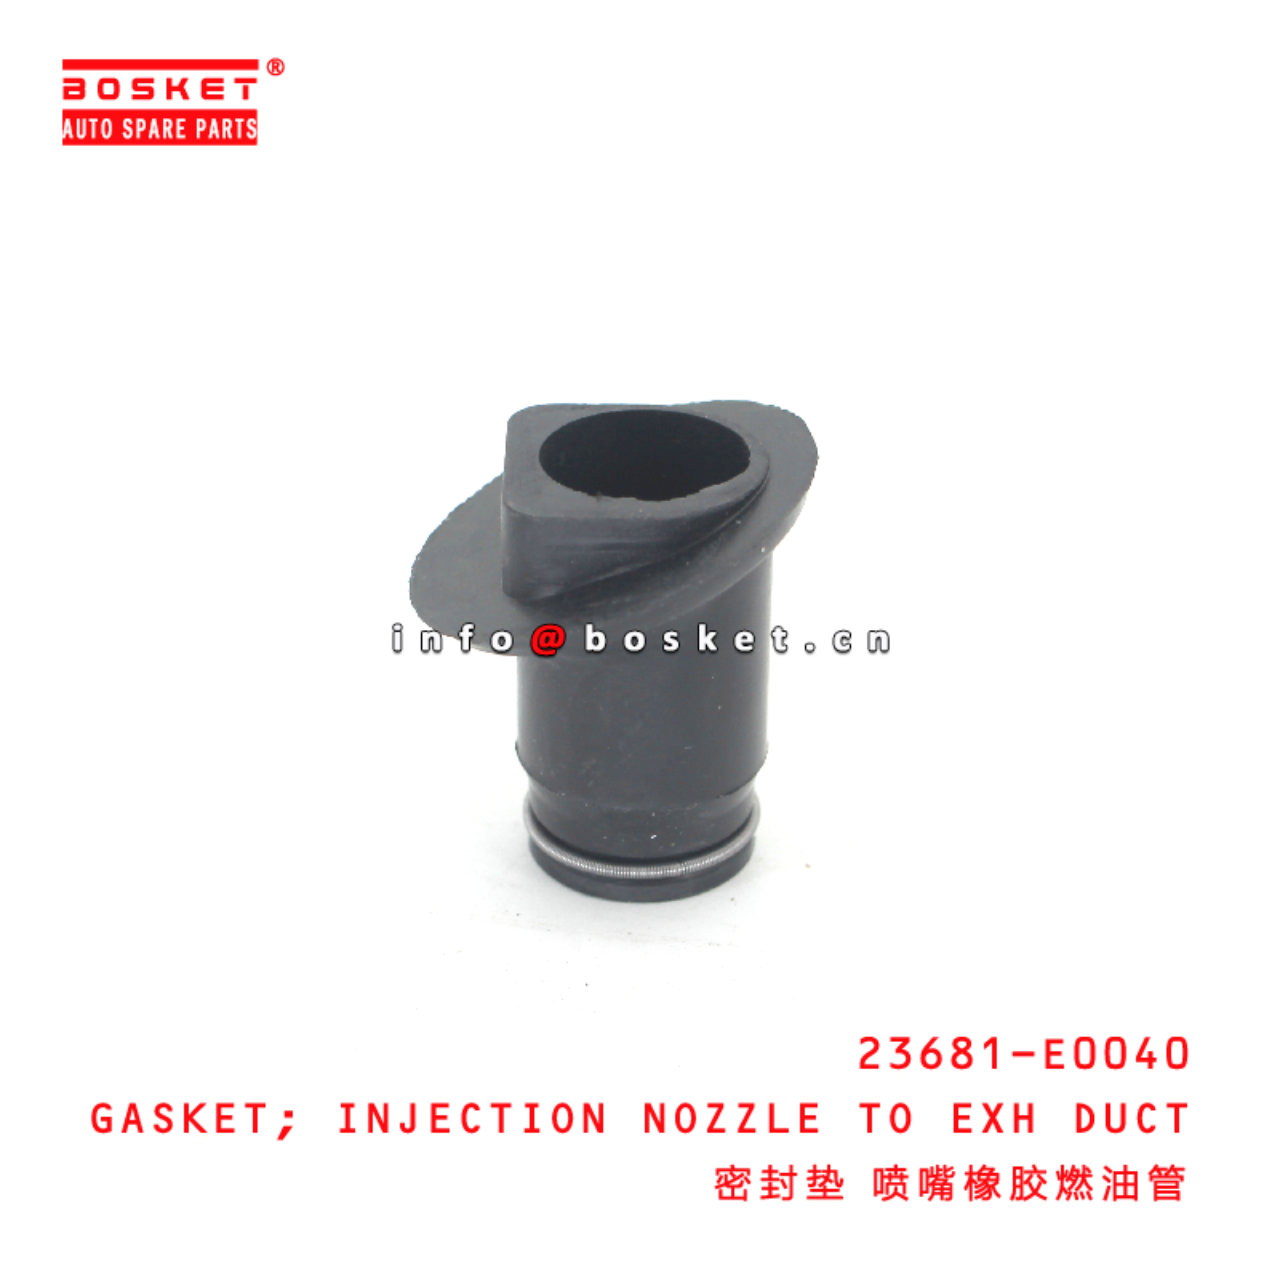 23681-E0040 Injection Nozzle To Exhaust Duct Gasket suitable for ISUZU HINO 500 J08E J07E J05